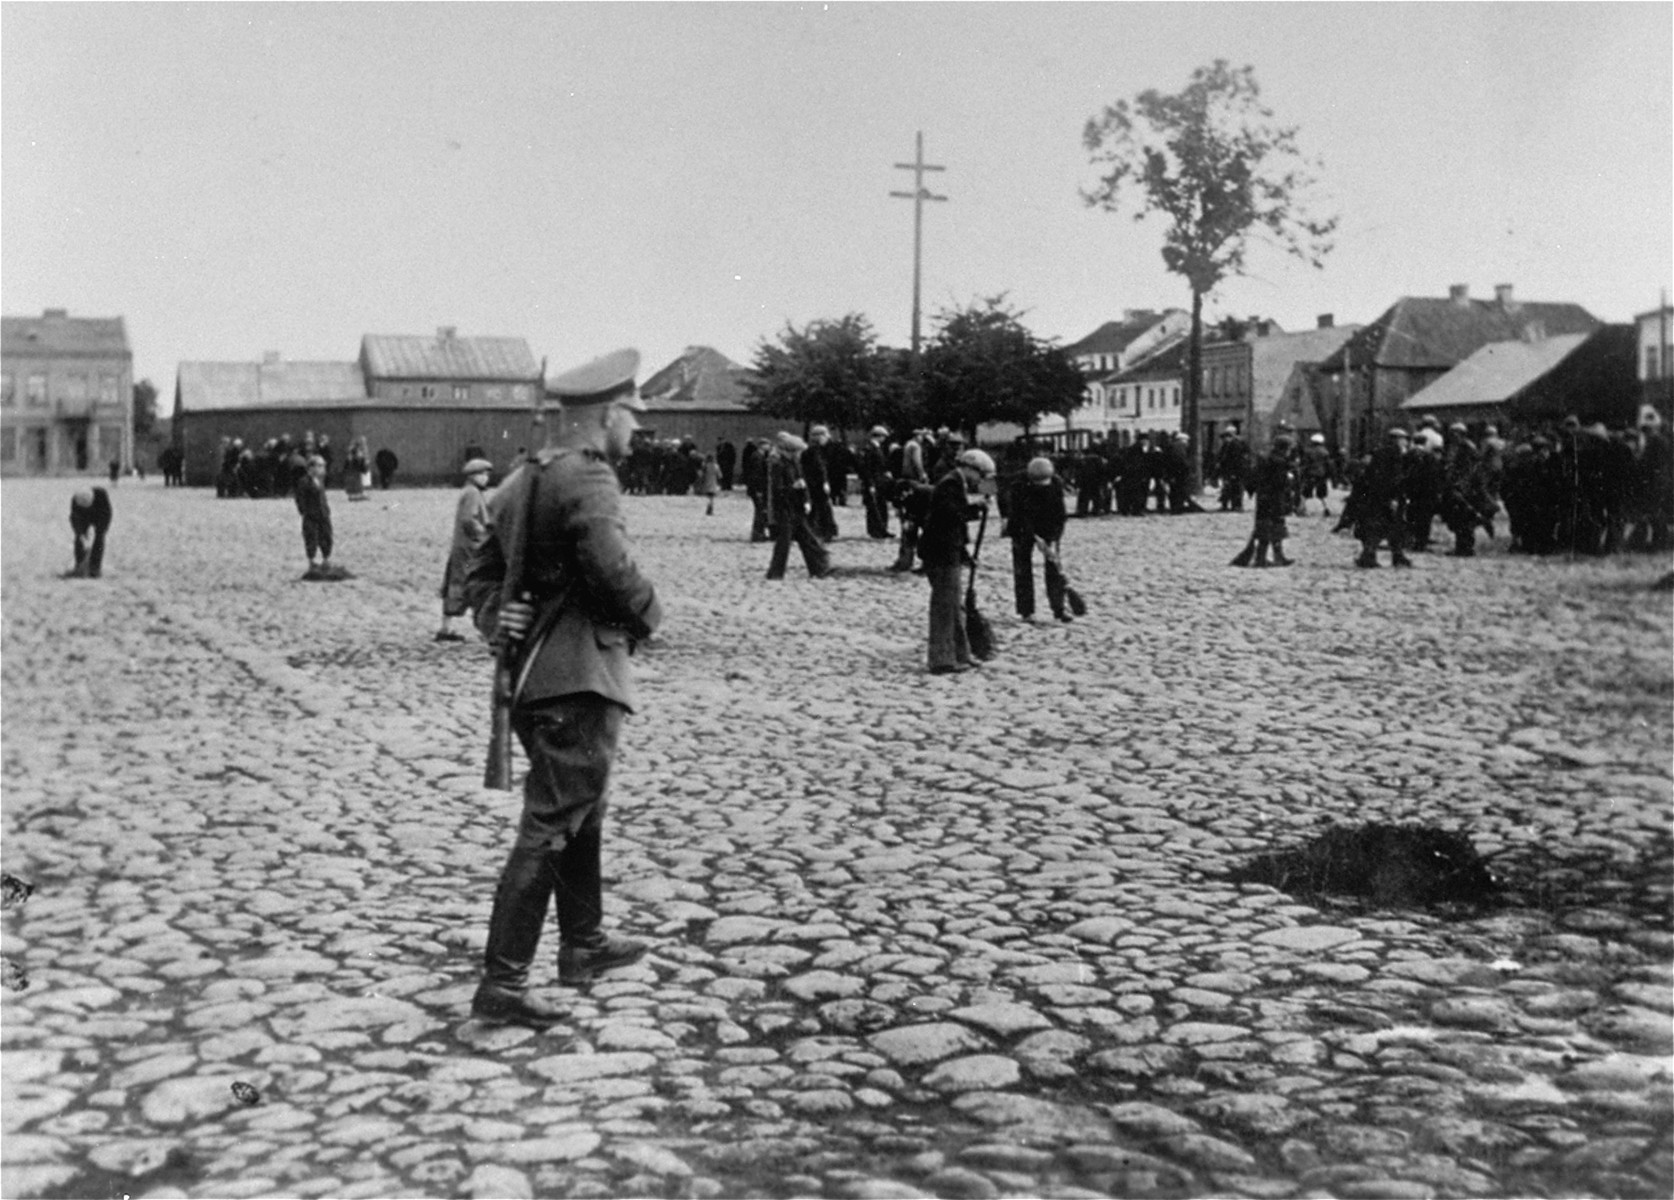 An SS member oversees a group of Jewish men at forced labor sweeping the pavement of the town square in Raciaz.